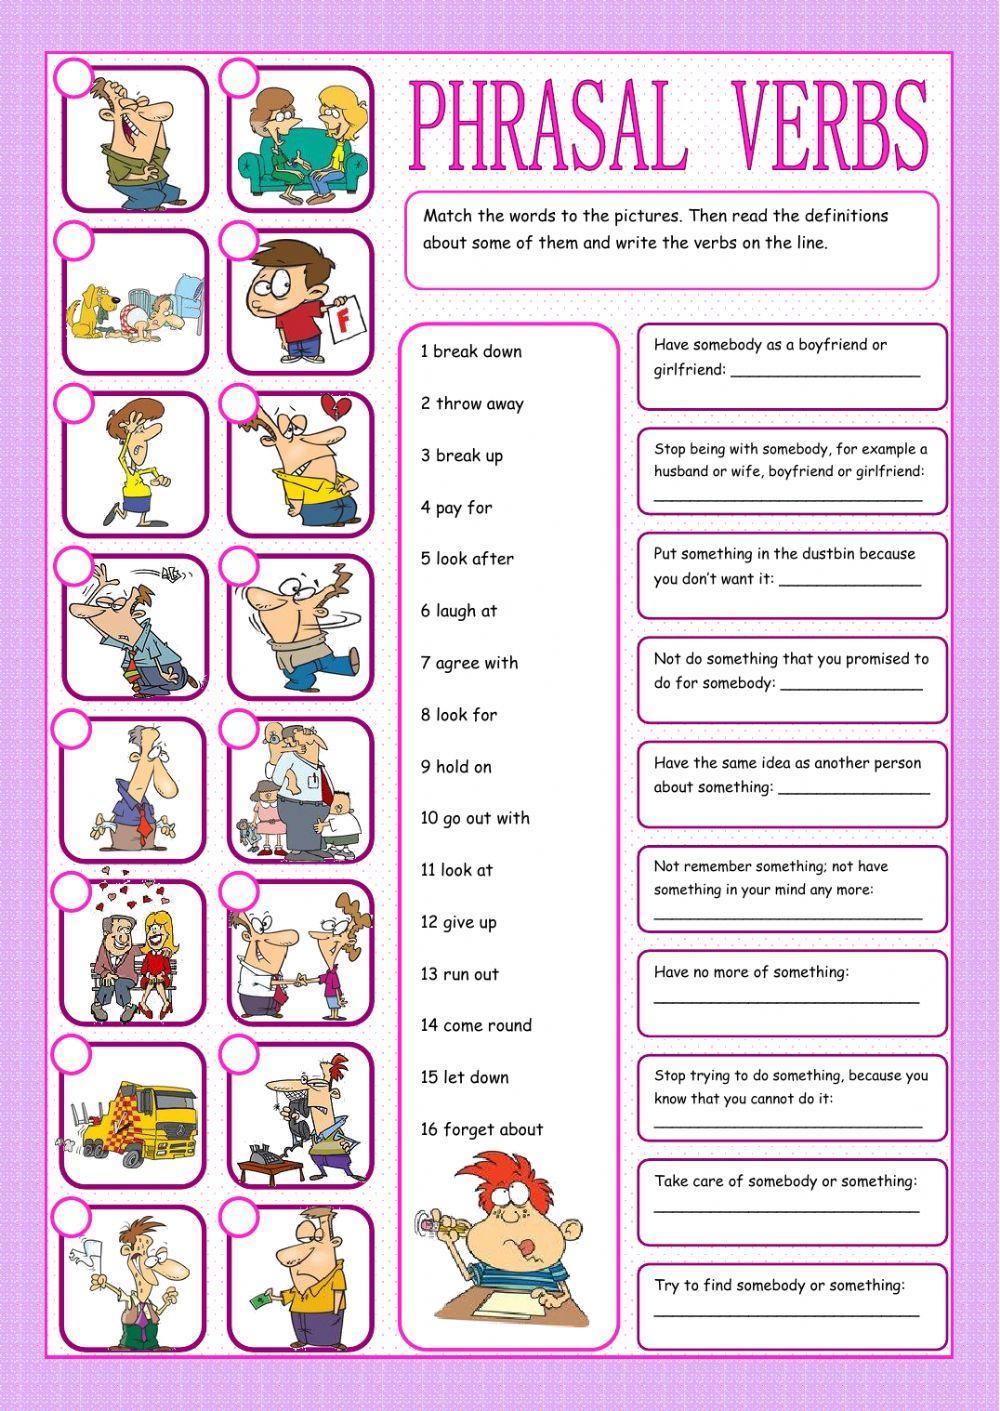 Phrasal verbs matching exercise